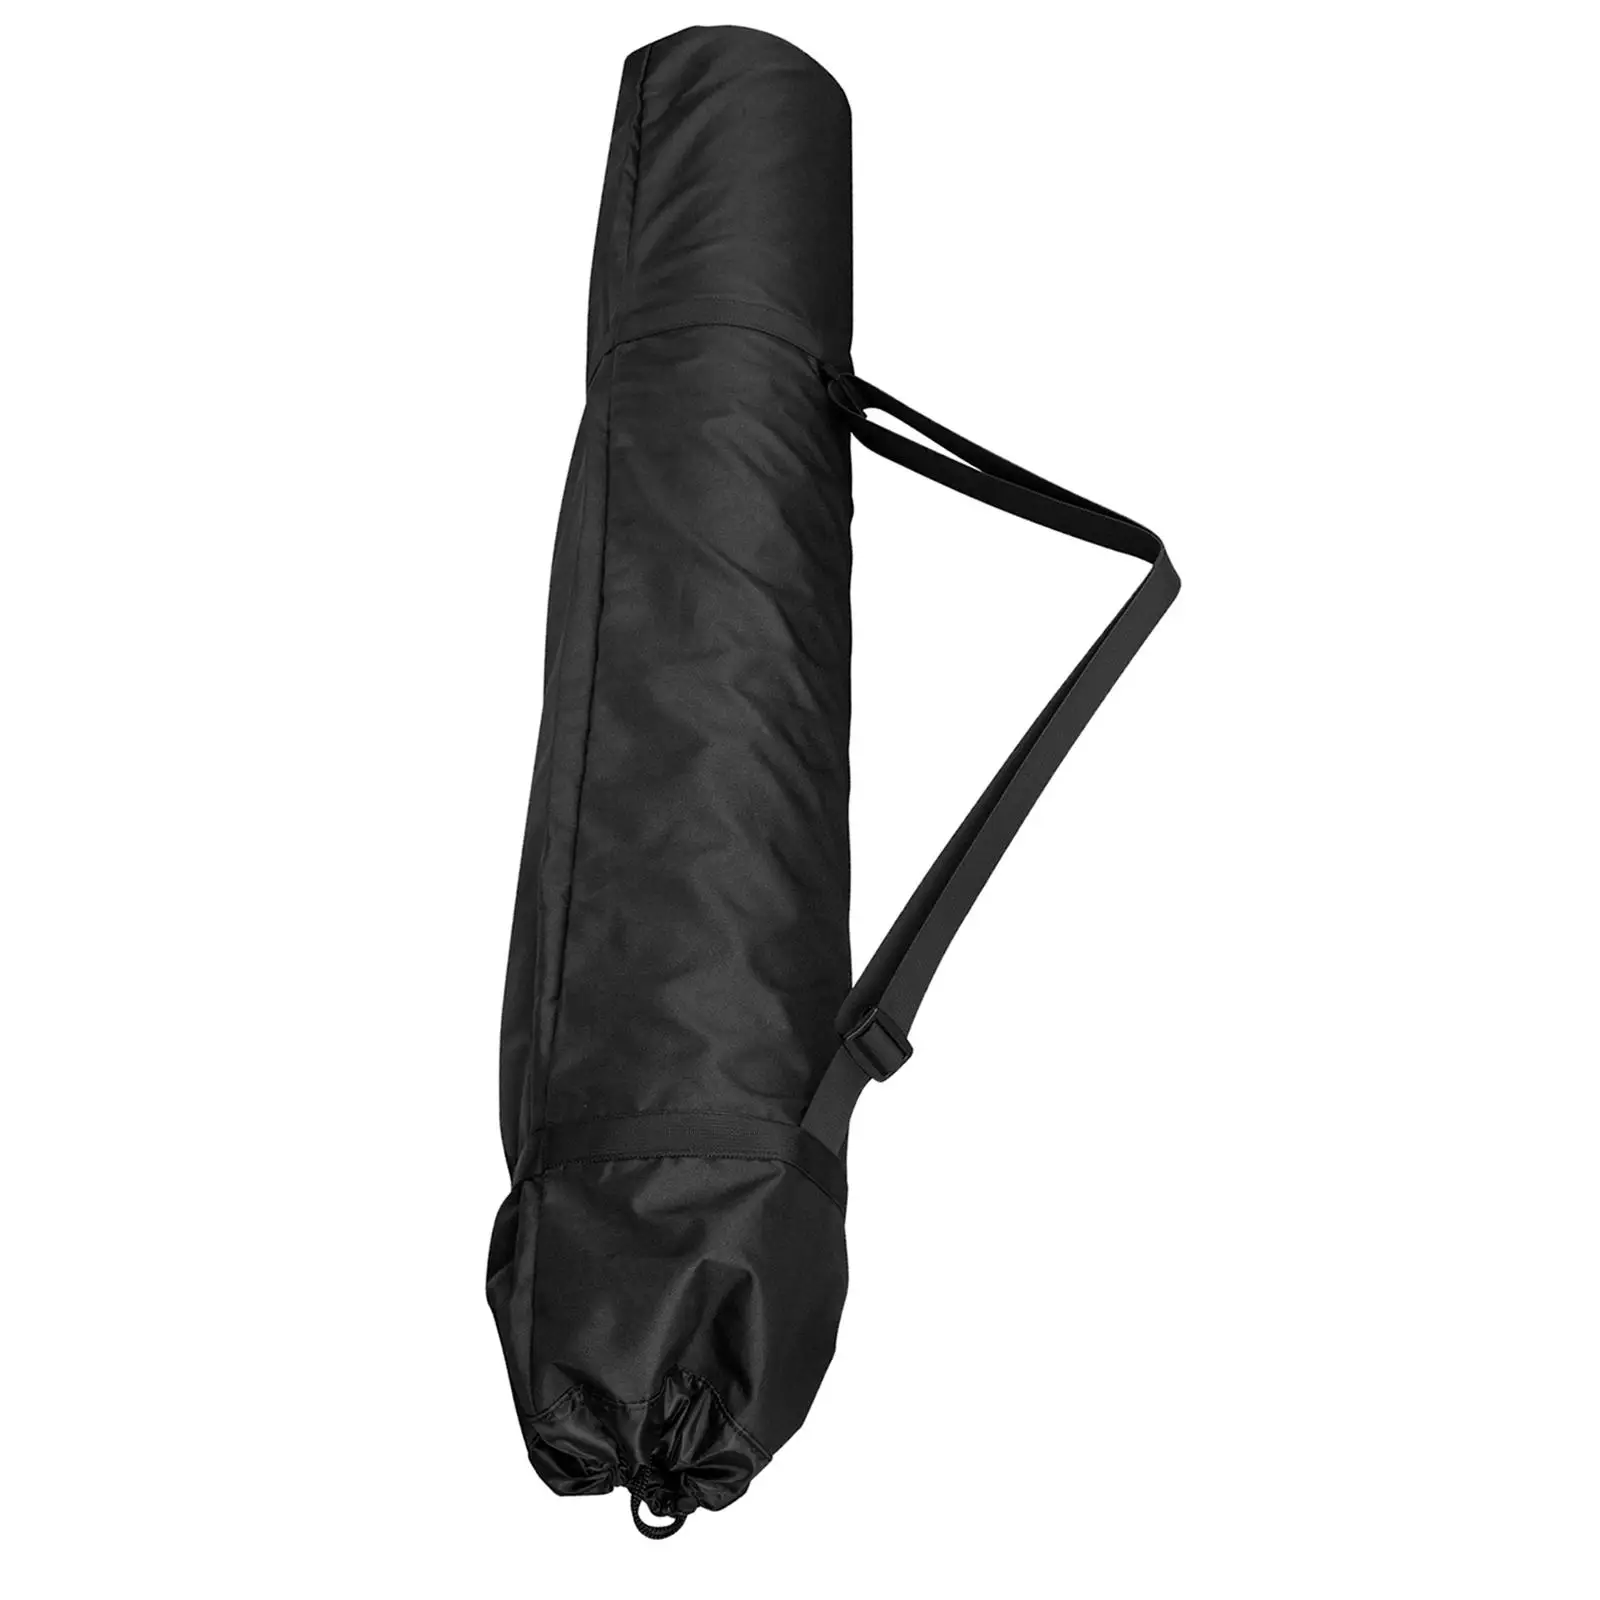 Portable Replacement Bag Folding Chair Handles Wide Drawstring Opening Outdoor Fishing Hiking Carry Bag for Backpacking Festival